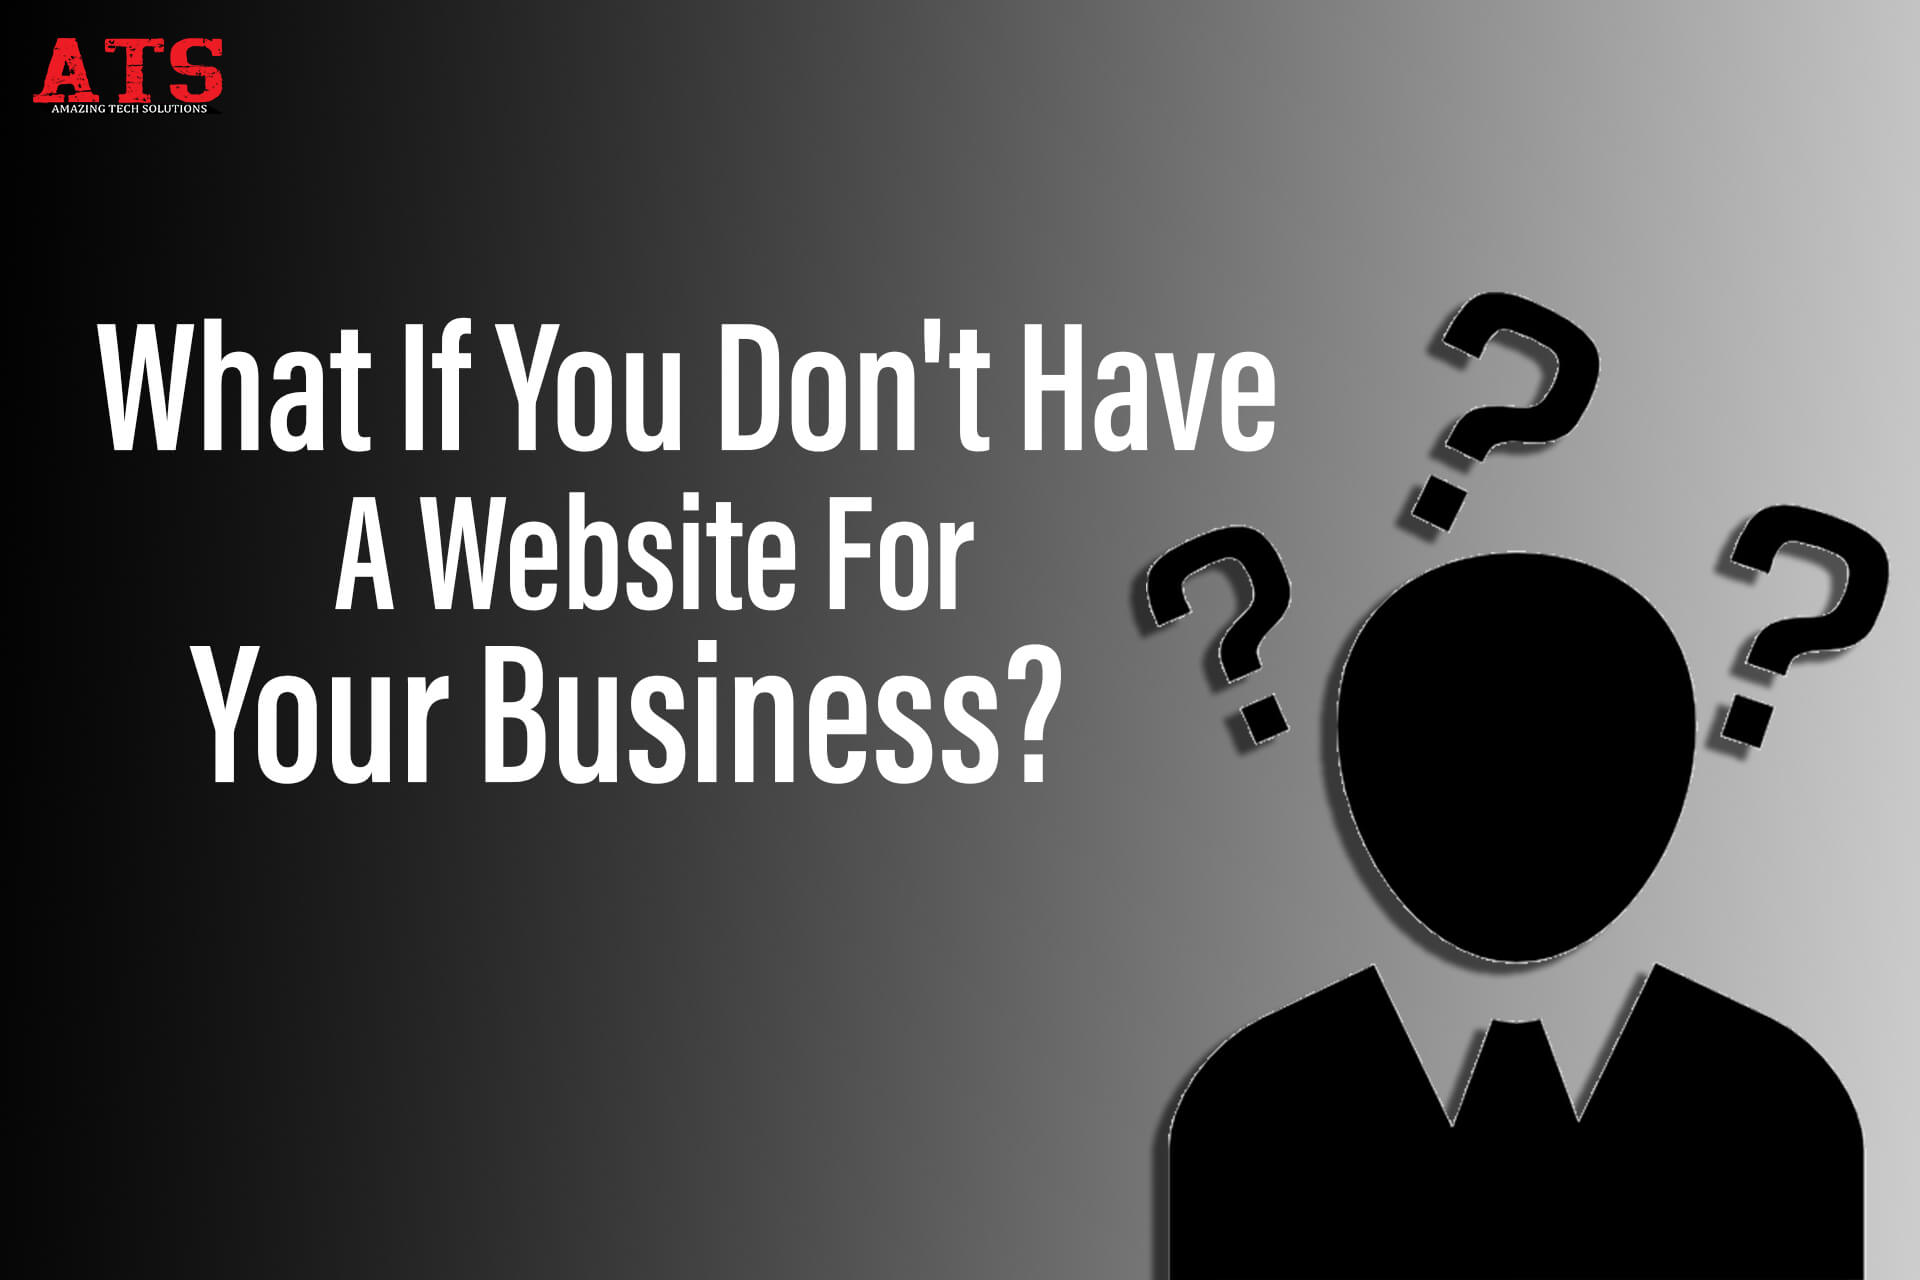 What if you didn't have a website for you business?